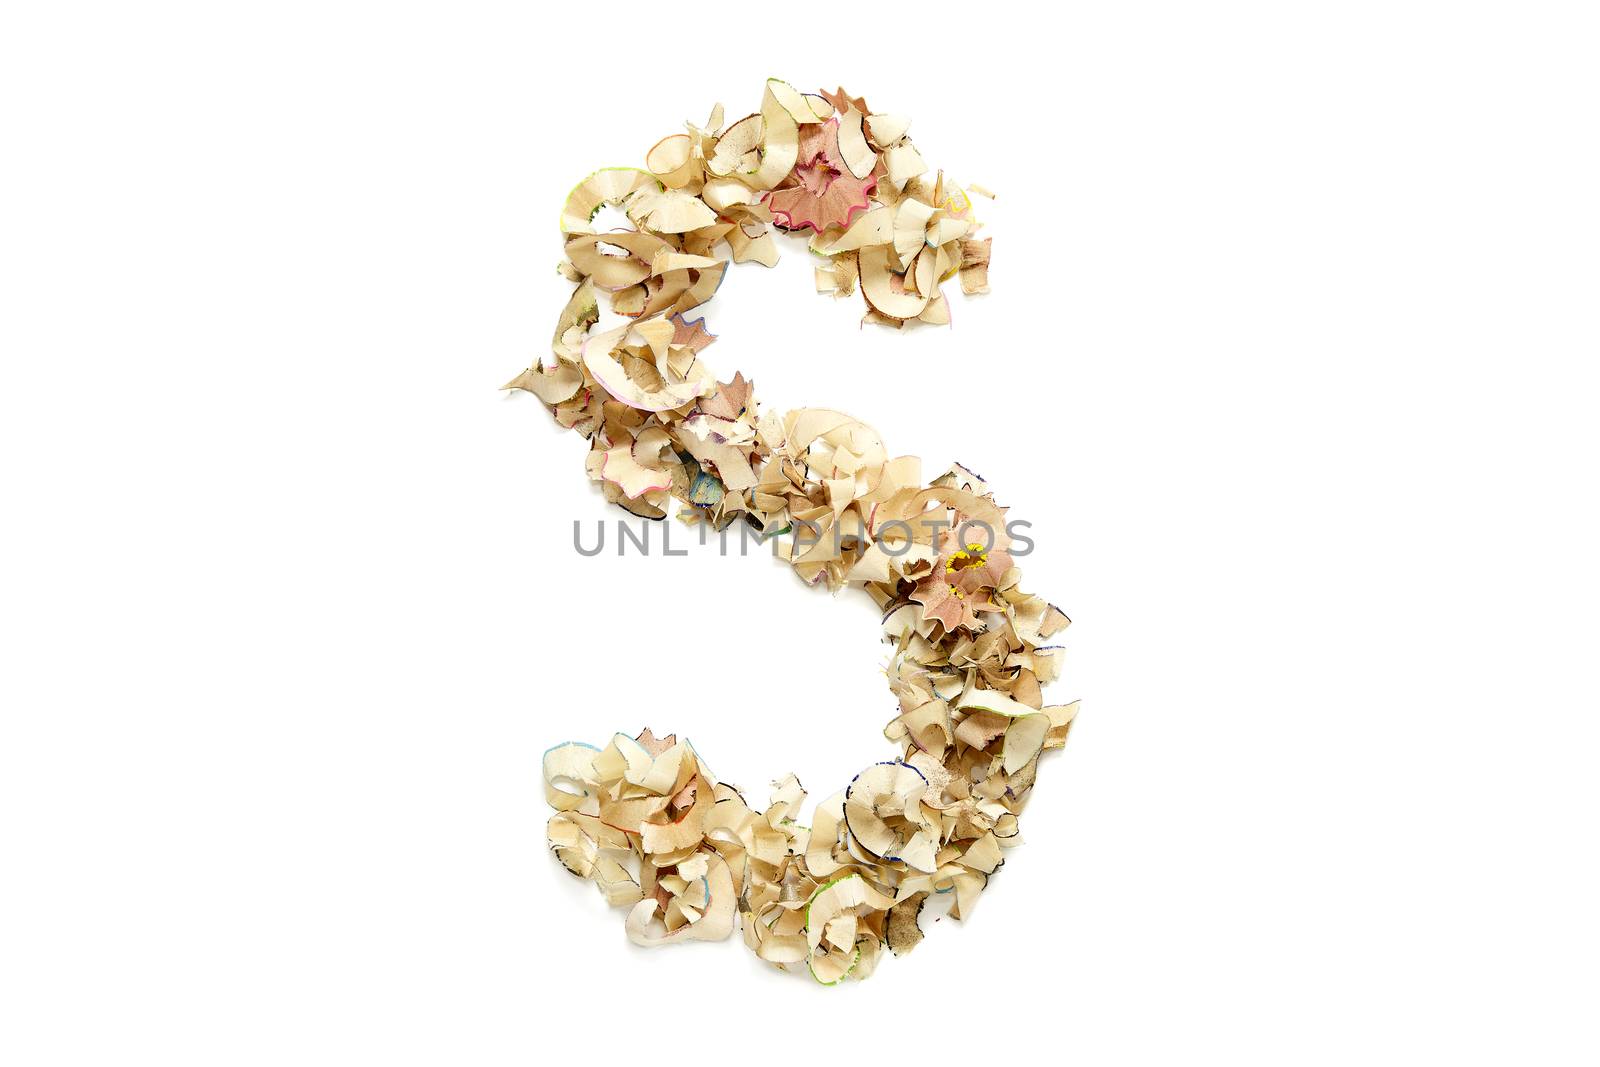 Letter S made from coloured pencil shavings for use in your design.